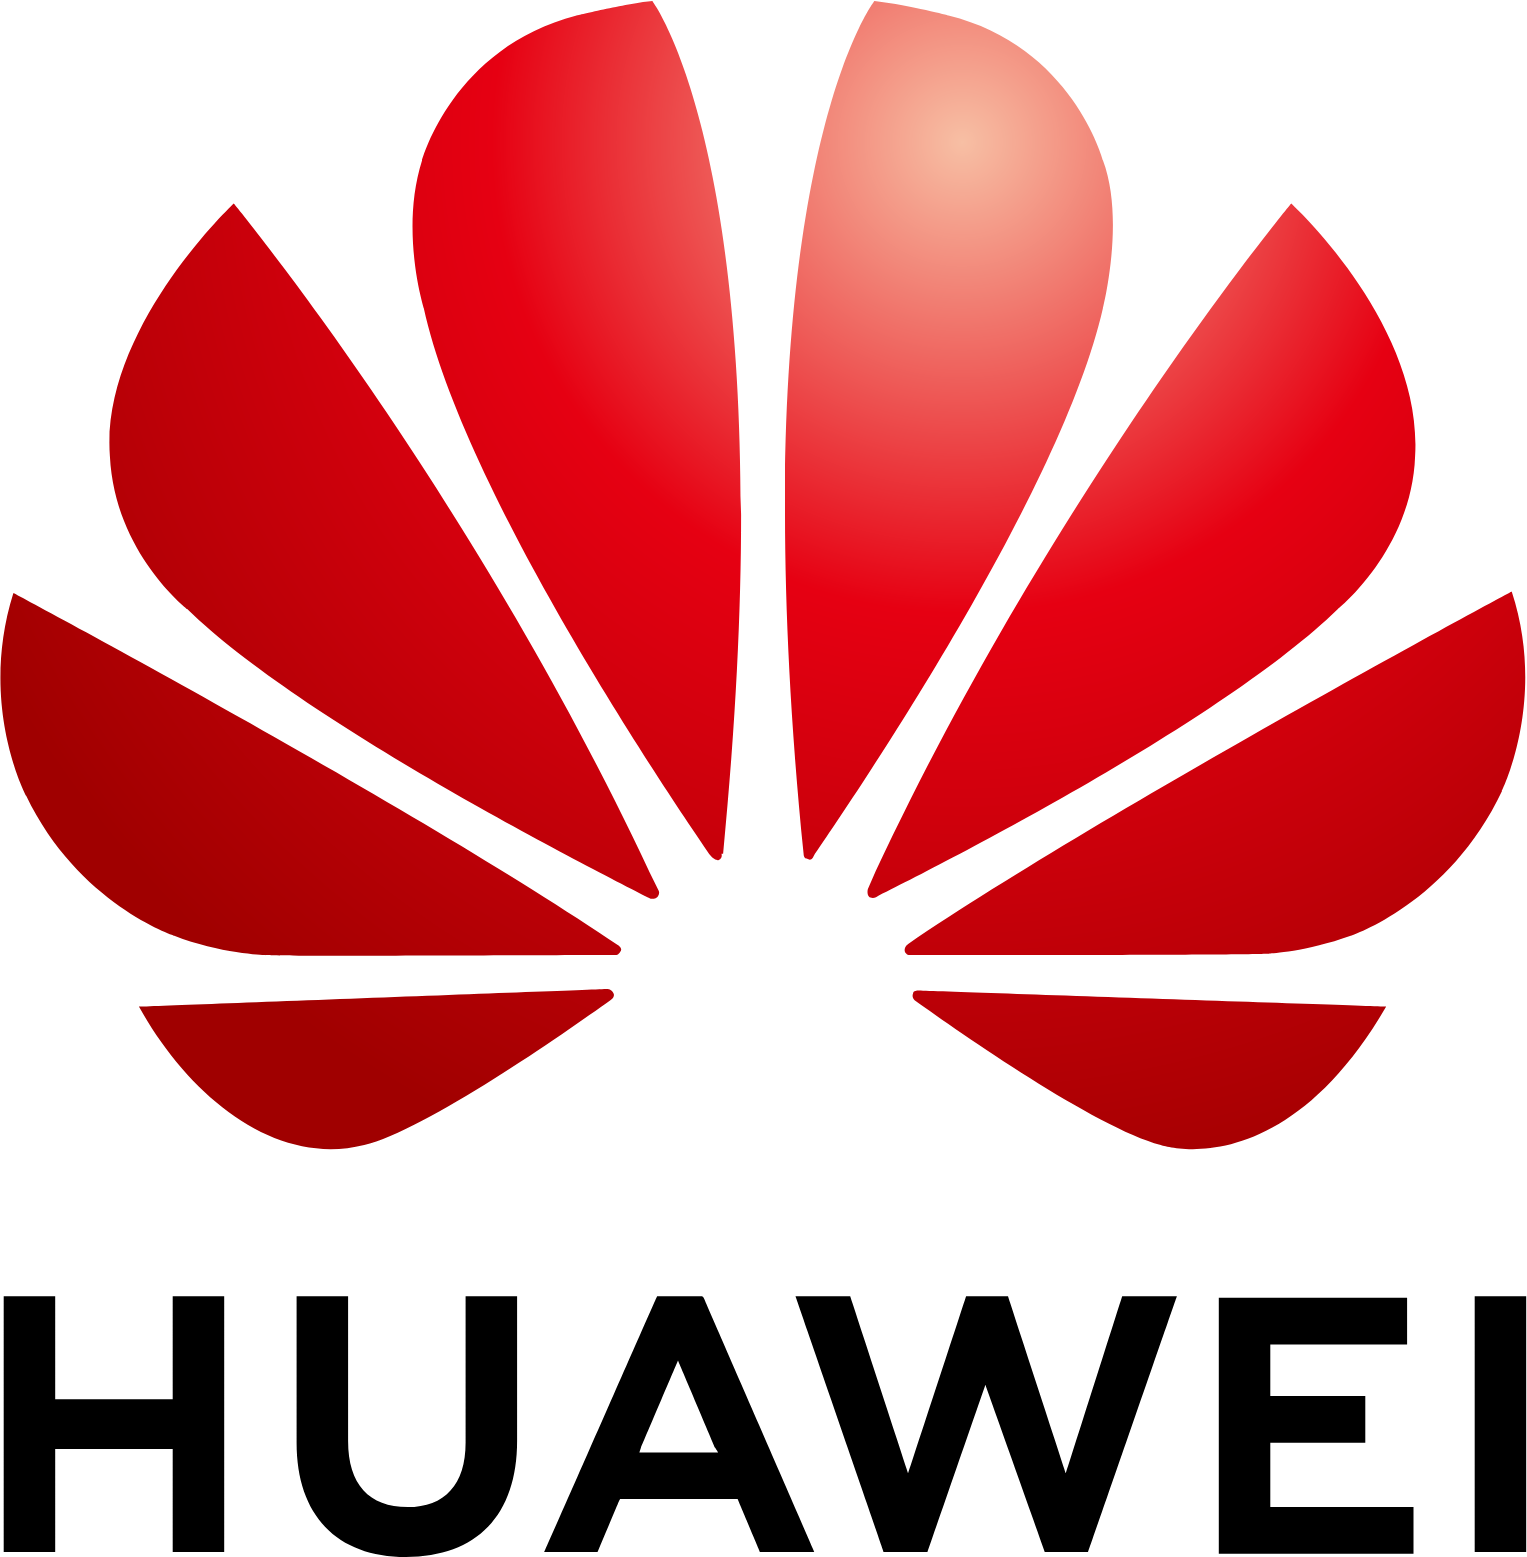 Huawei logo in transparent PNG and vectorized SVG formats